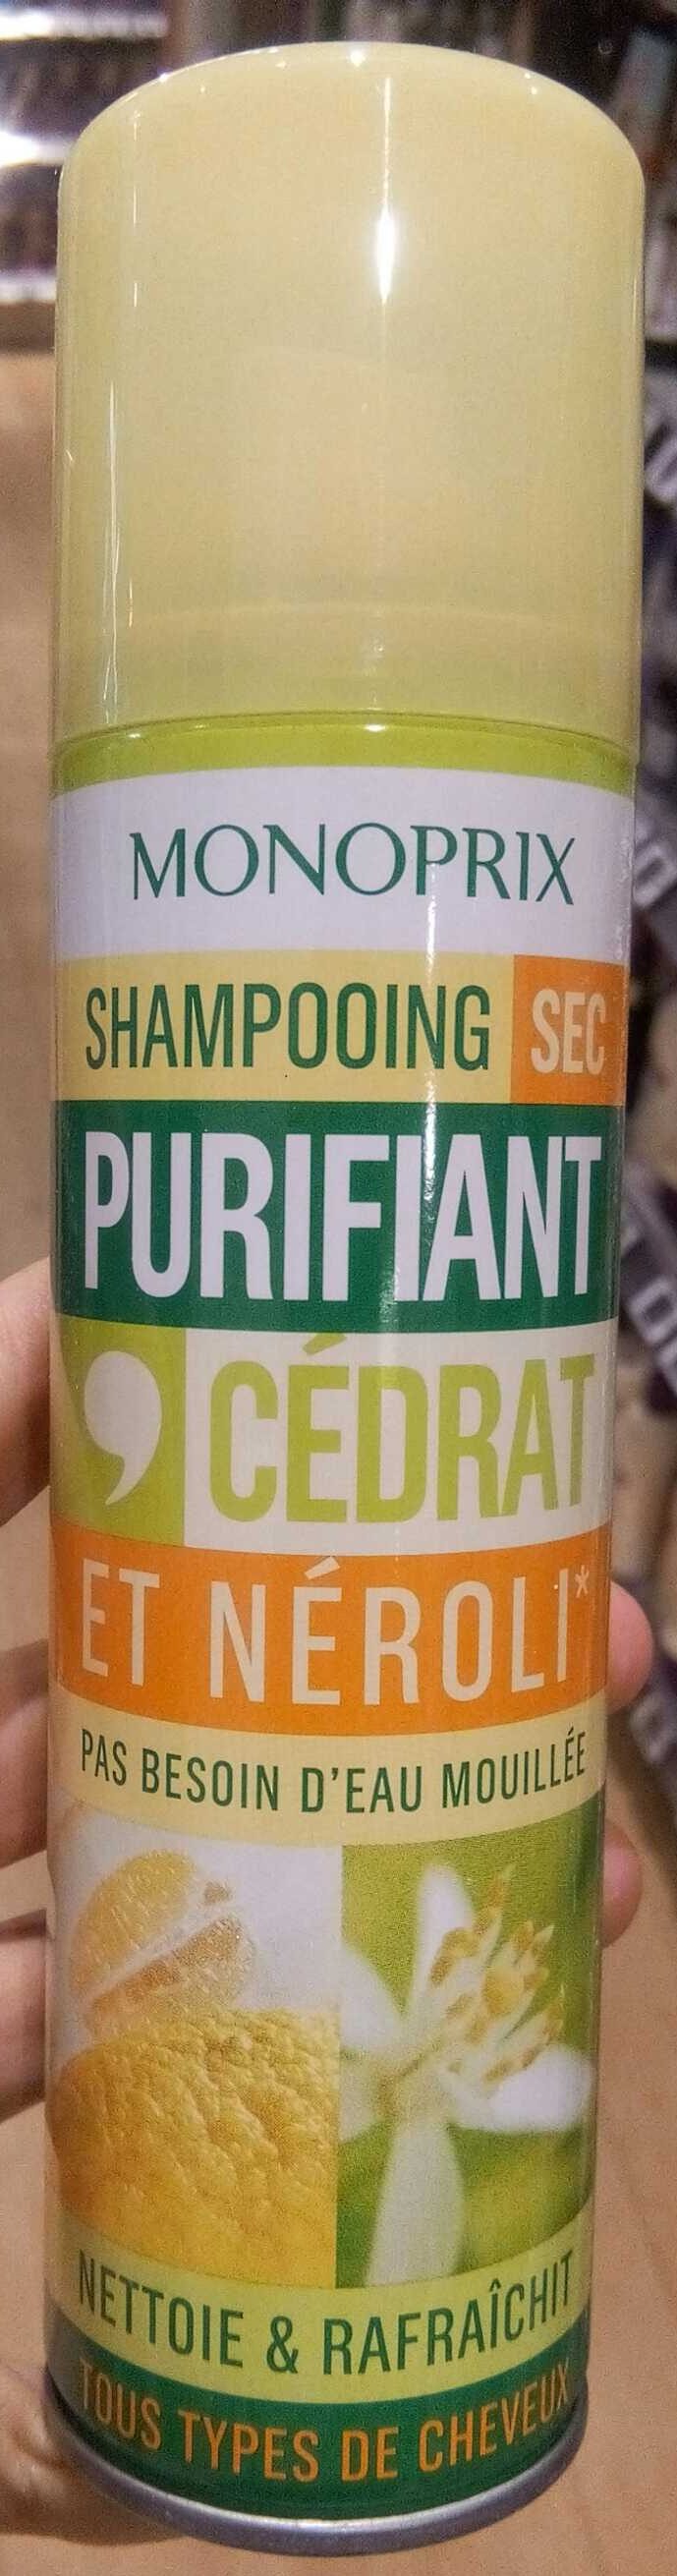 Shampoing sec - Product - fr